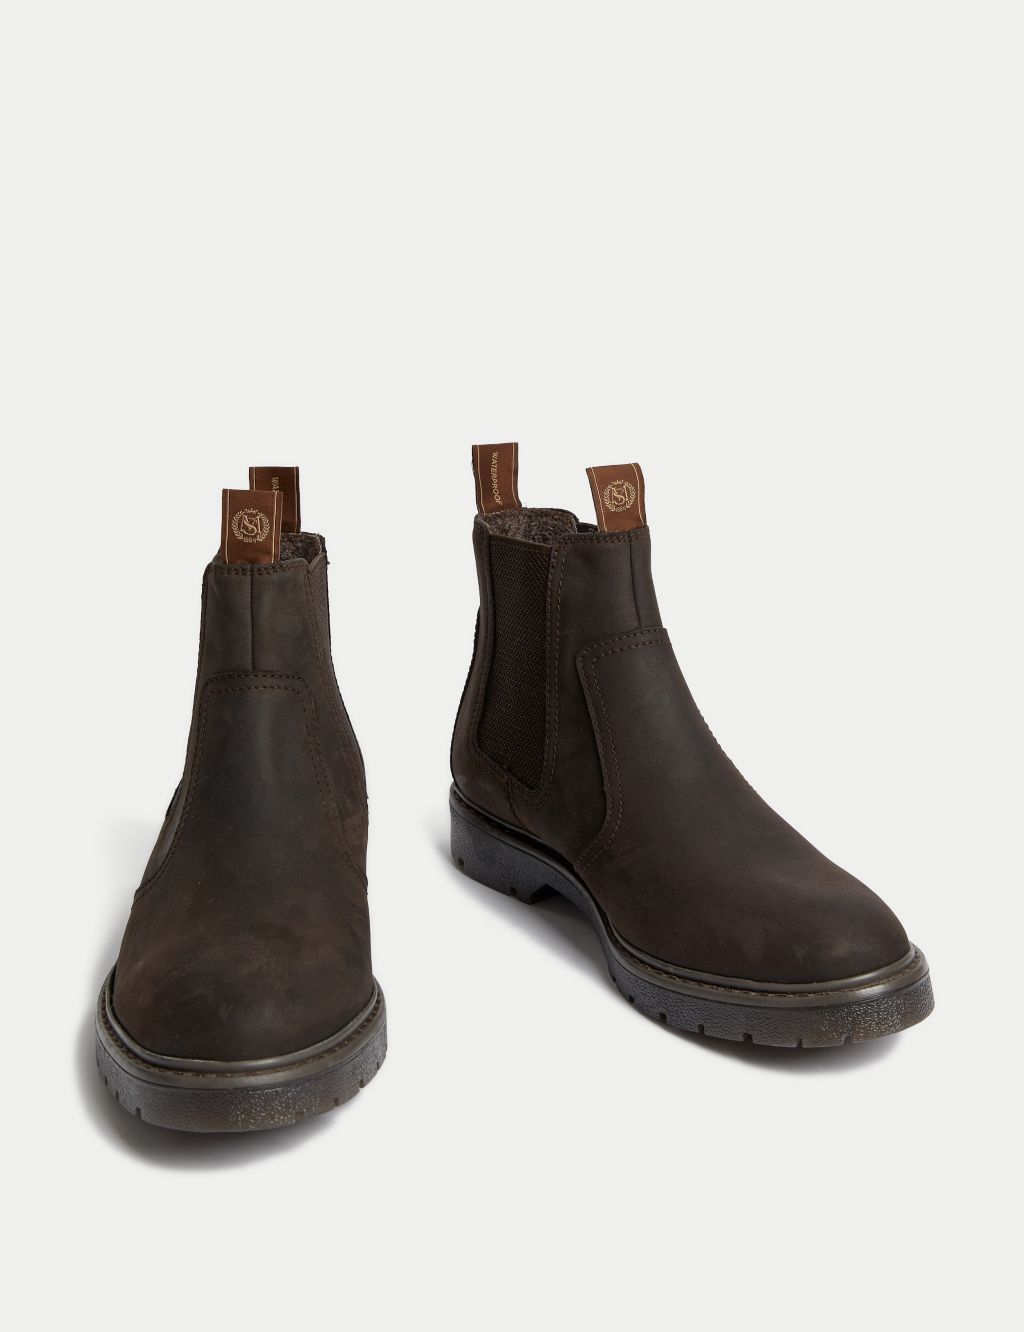 Leather Waterproof Chelsea Boots image 2